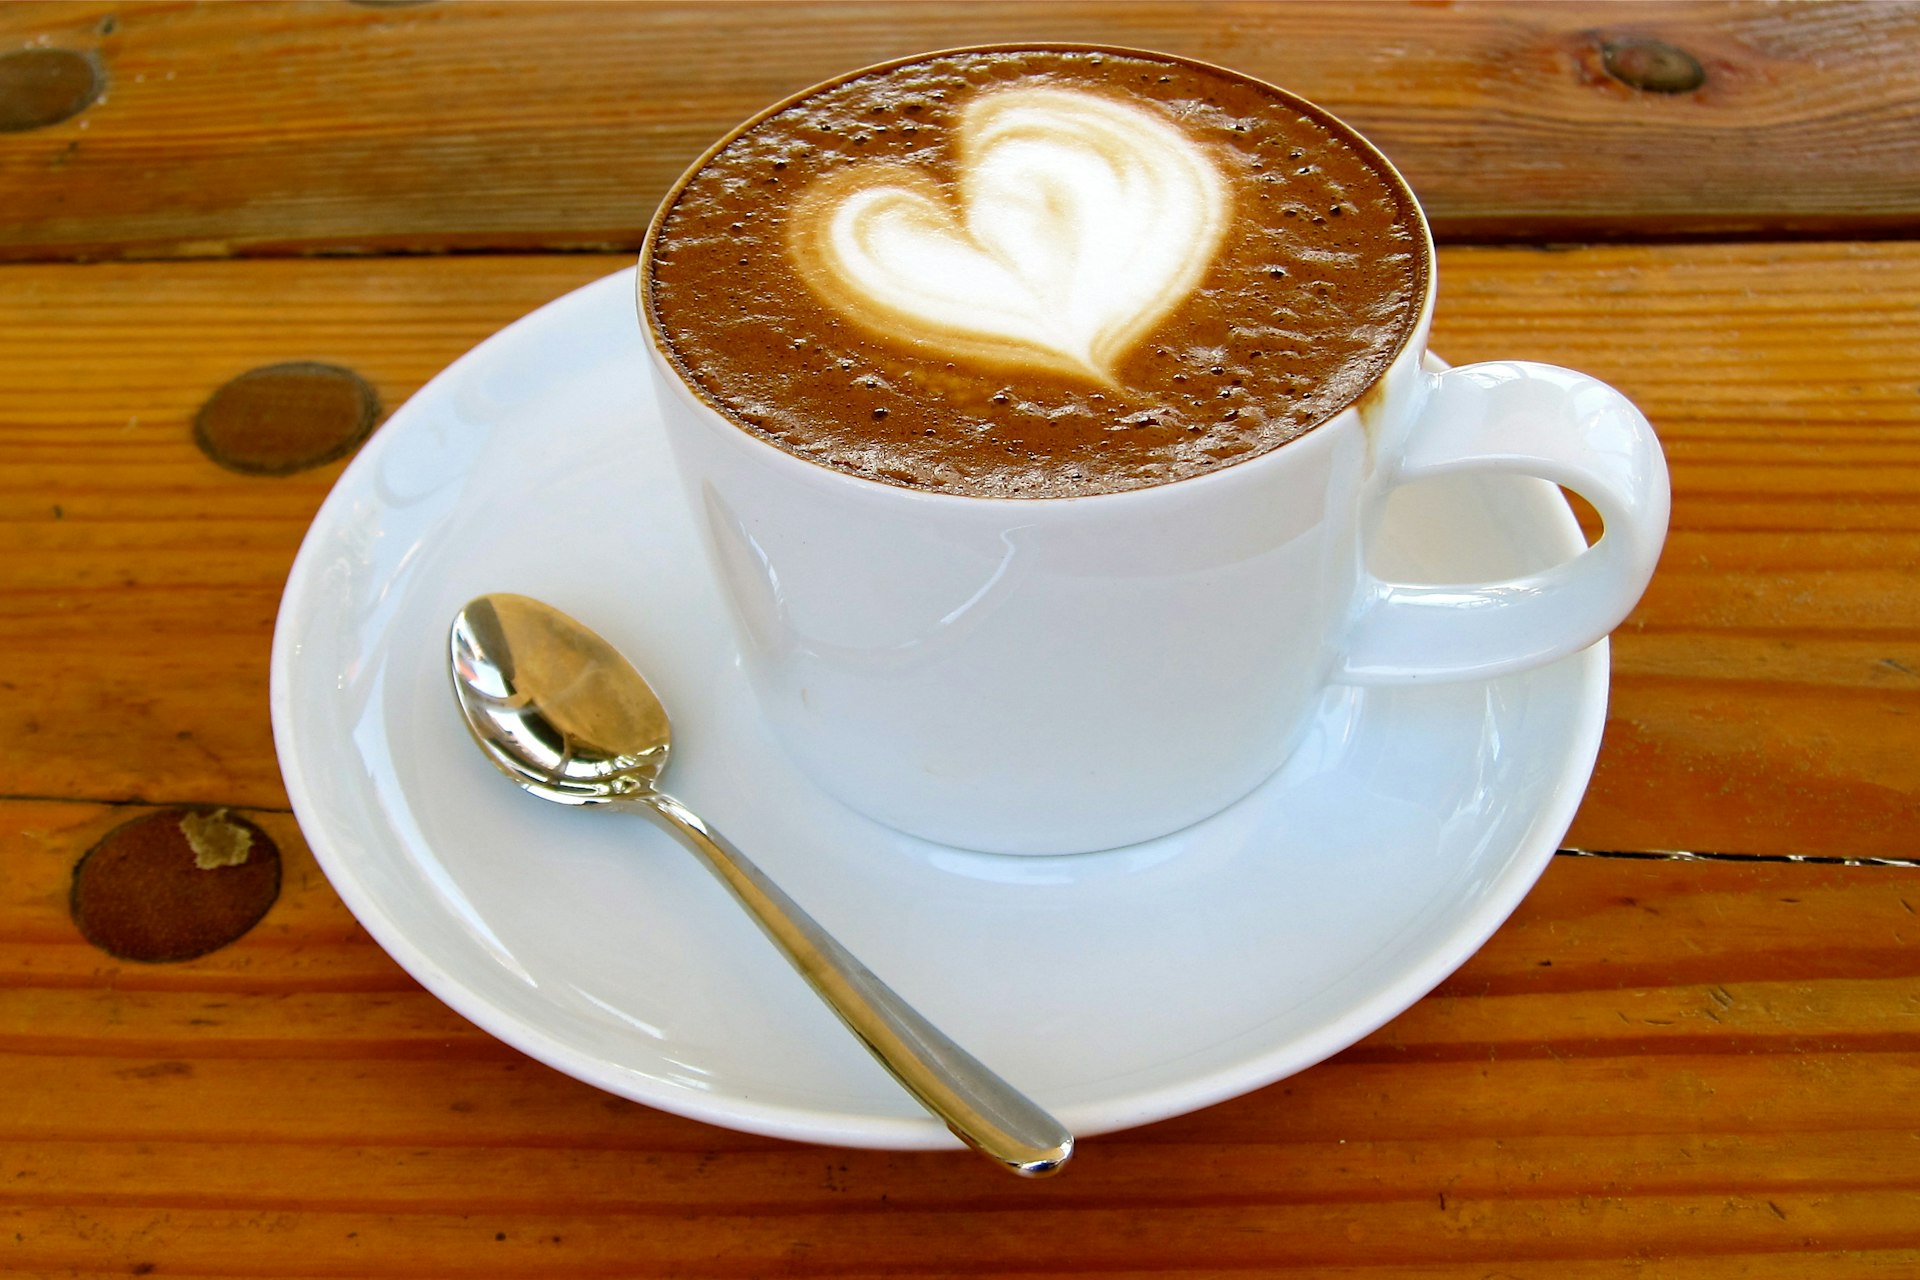 A warming cup of coffee at Gene Cafe. Image by John Lee / Lonely Planet